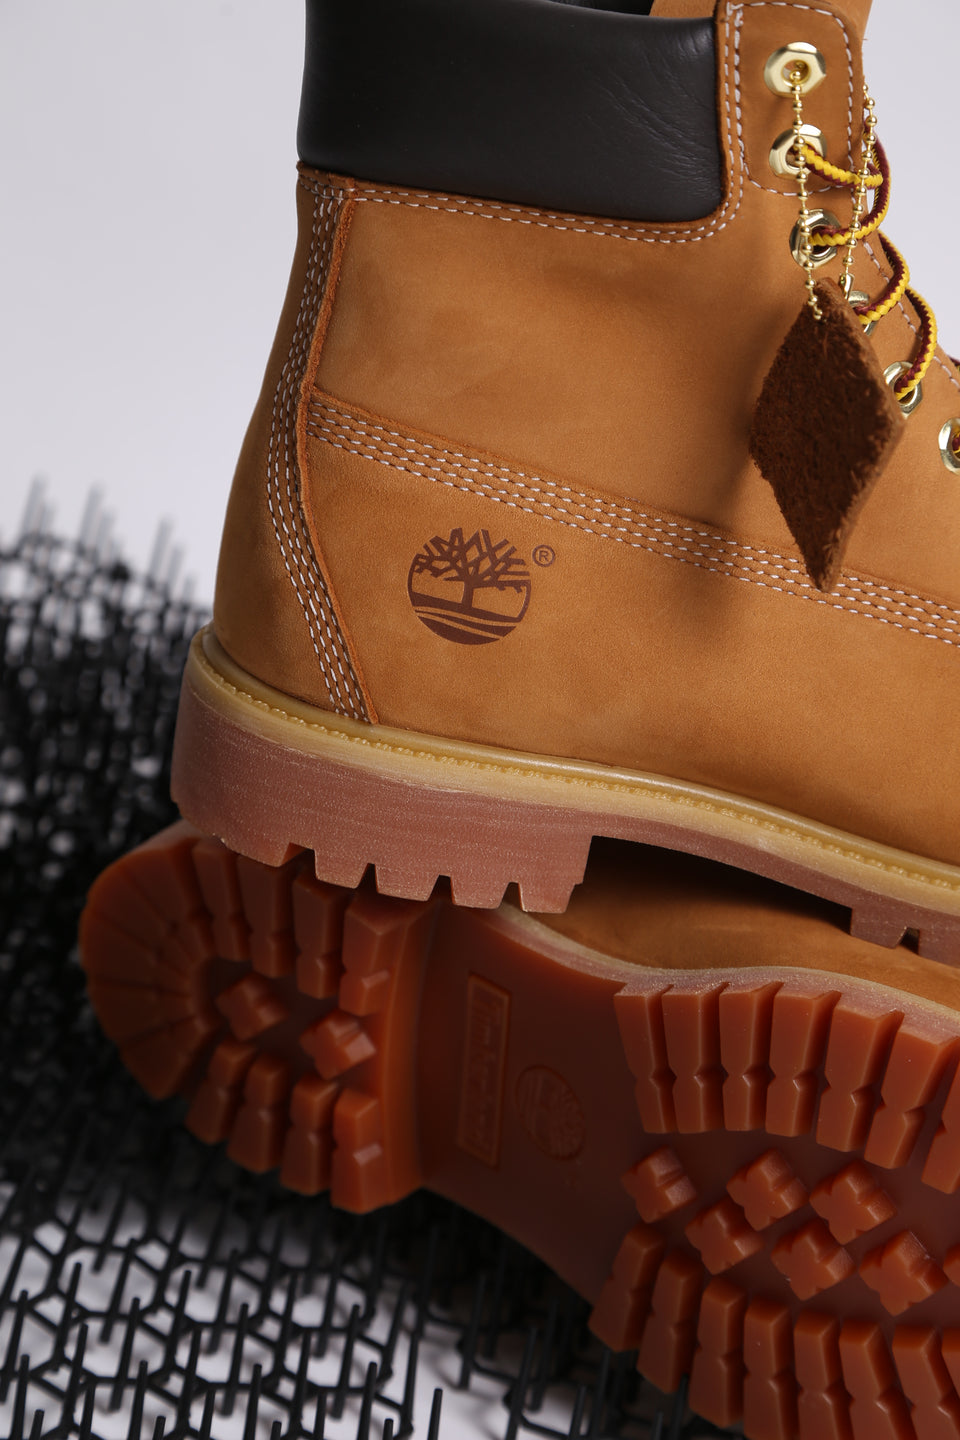 Timberland 6in PRM WP - Wheat